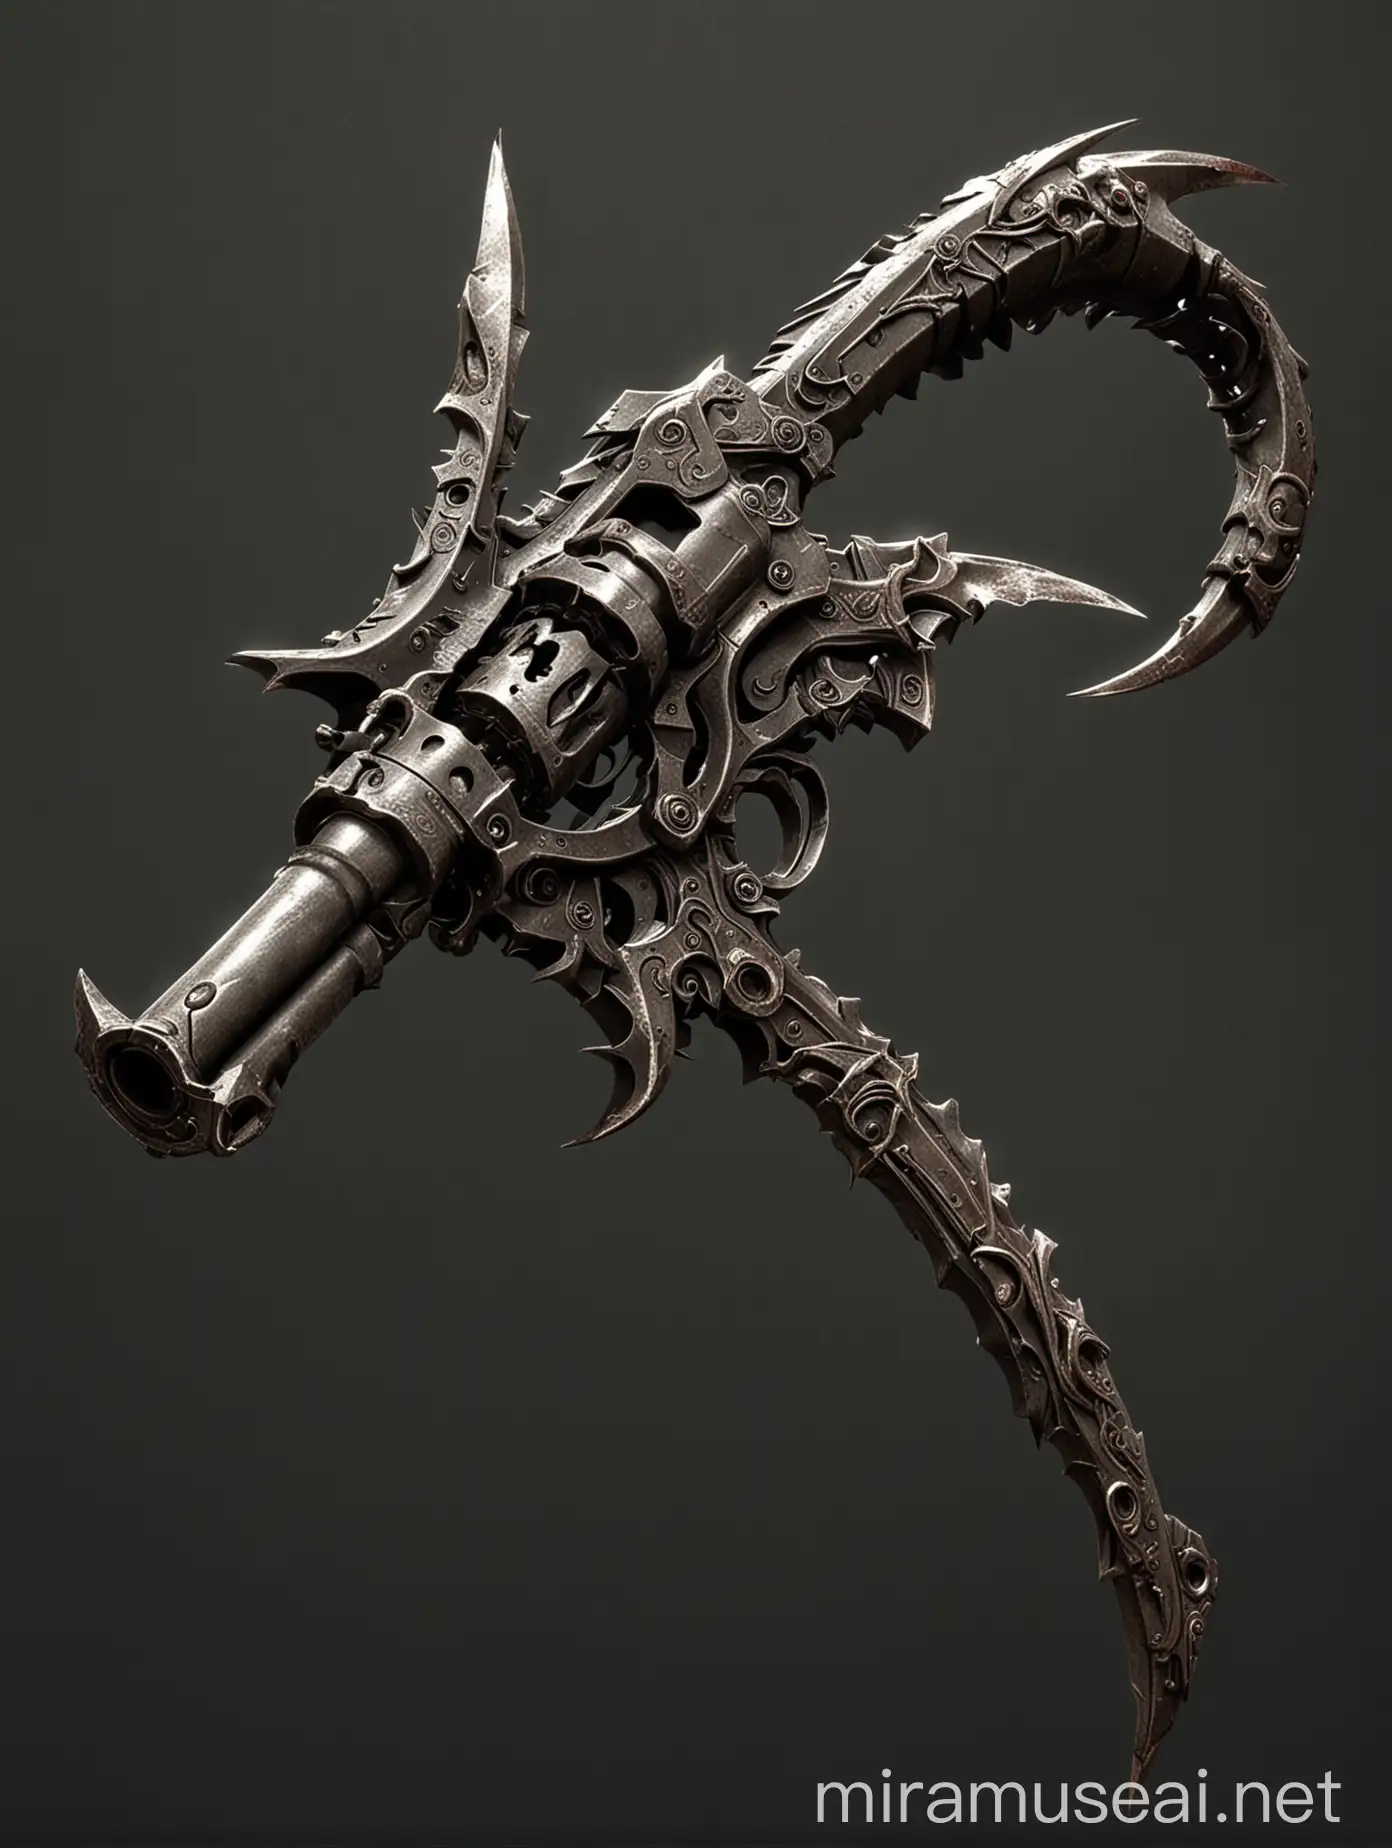 weapon as a demonic sickle and revolver gun attached to it